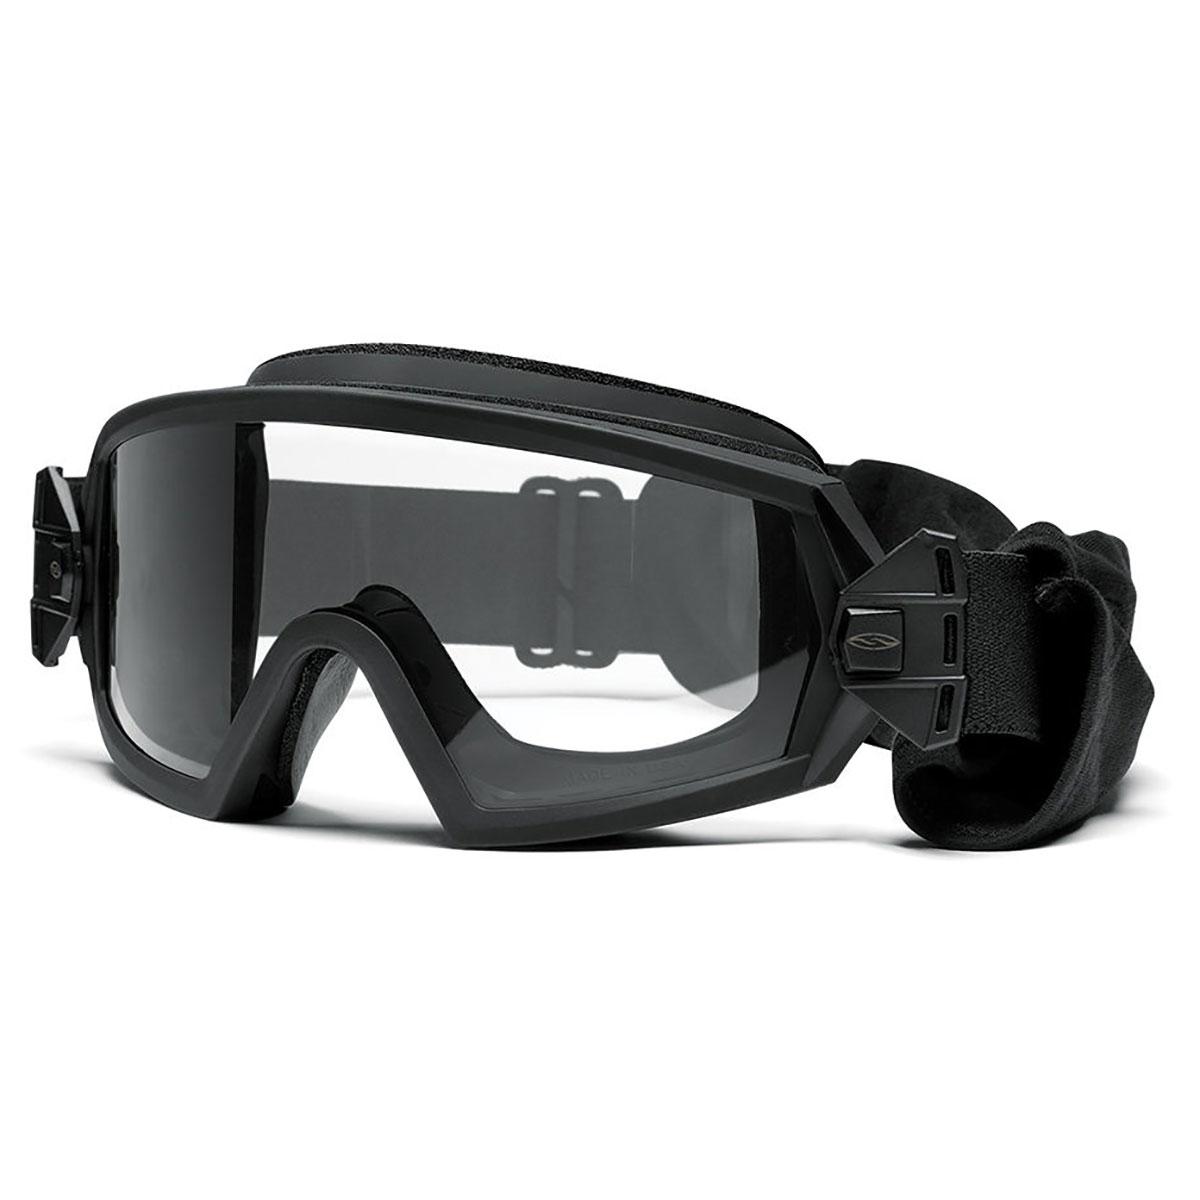 Smith Elite OTW(Outside The Wire) Goggle (Asian Fit)